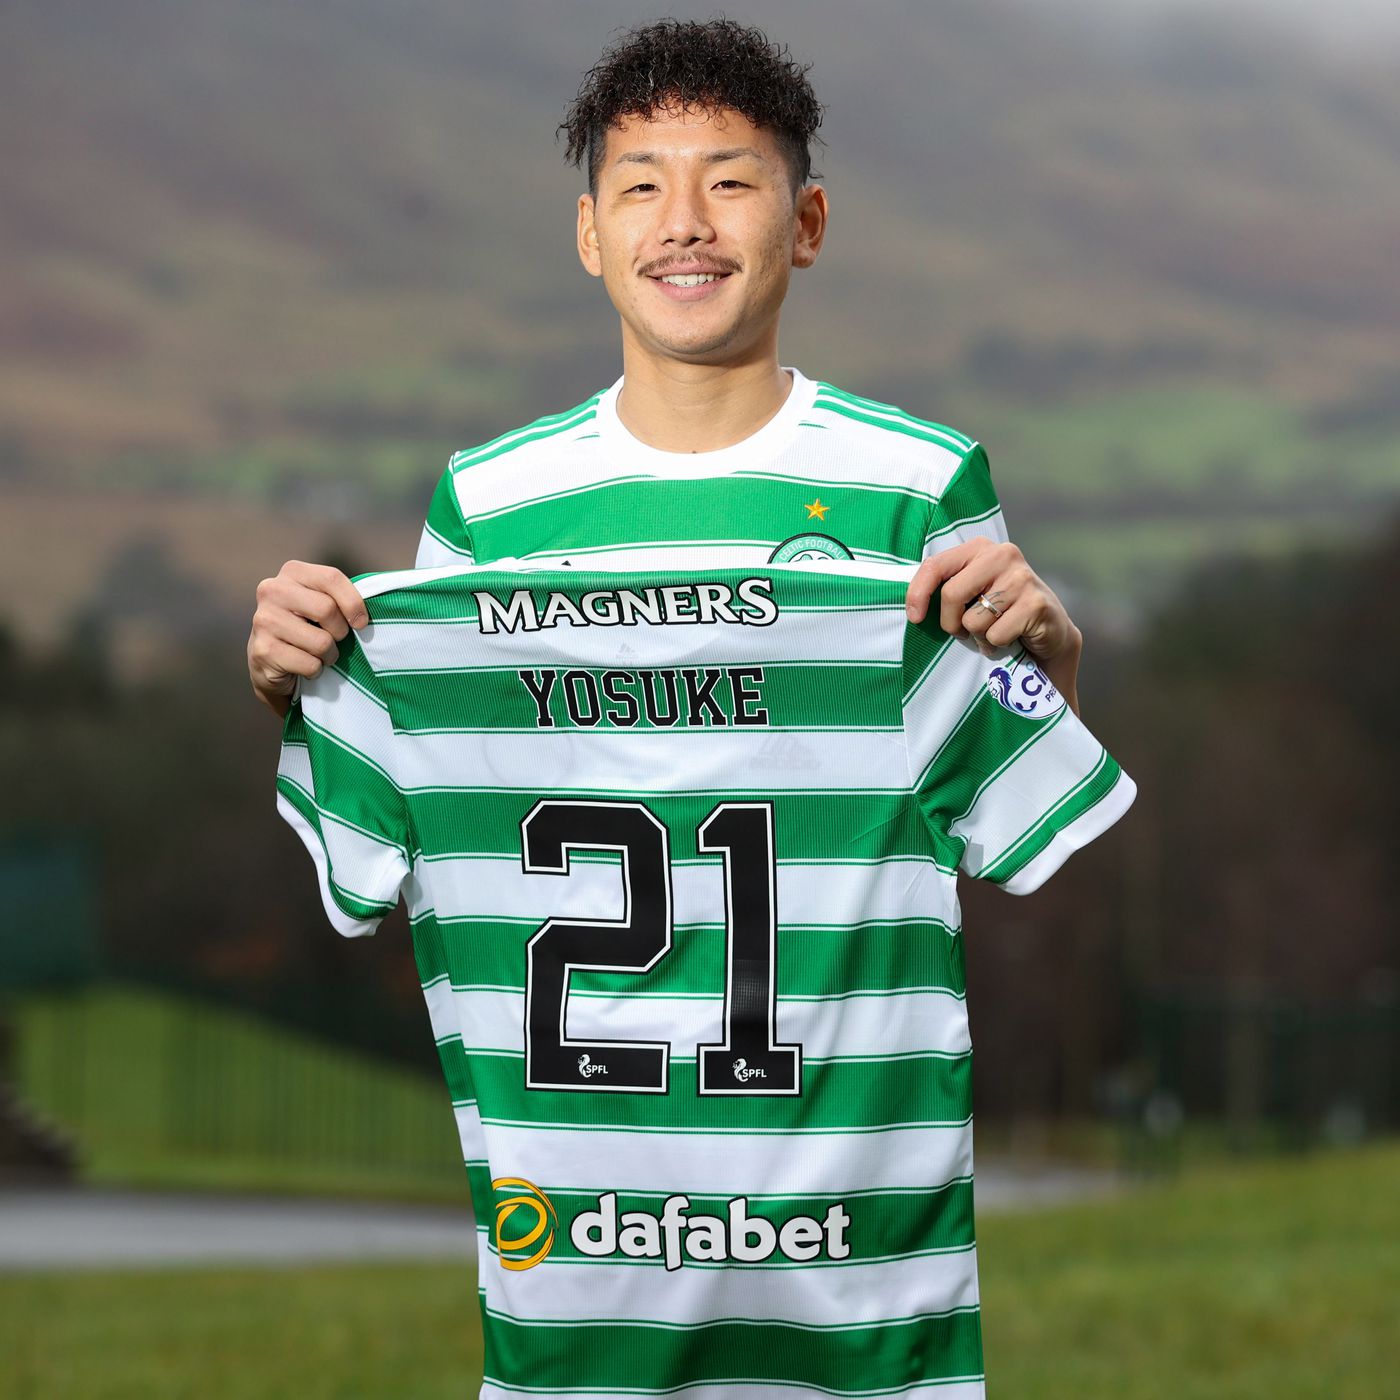 Japanese trio sign for Celtic - /podcast thoughts - The